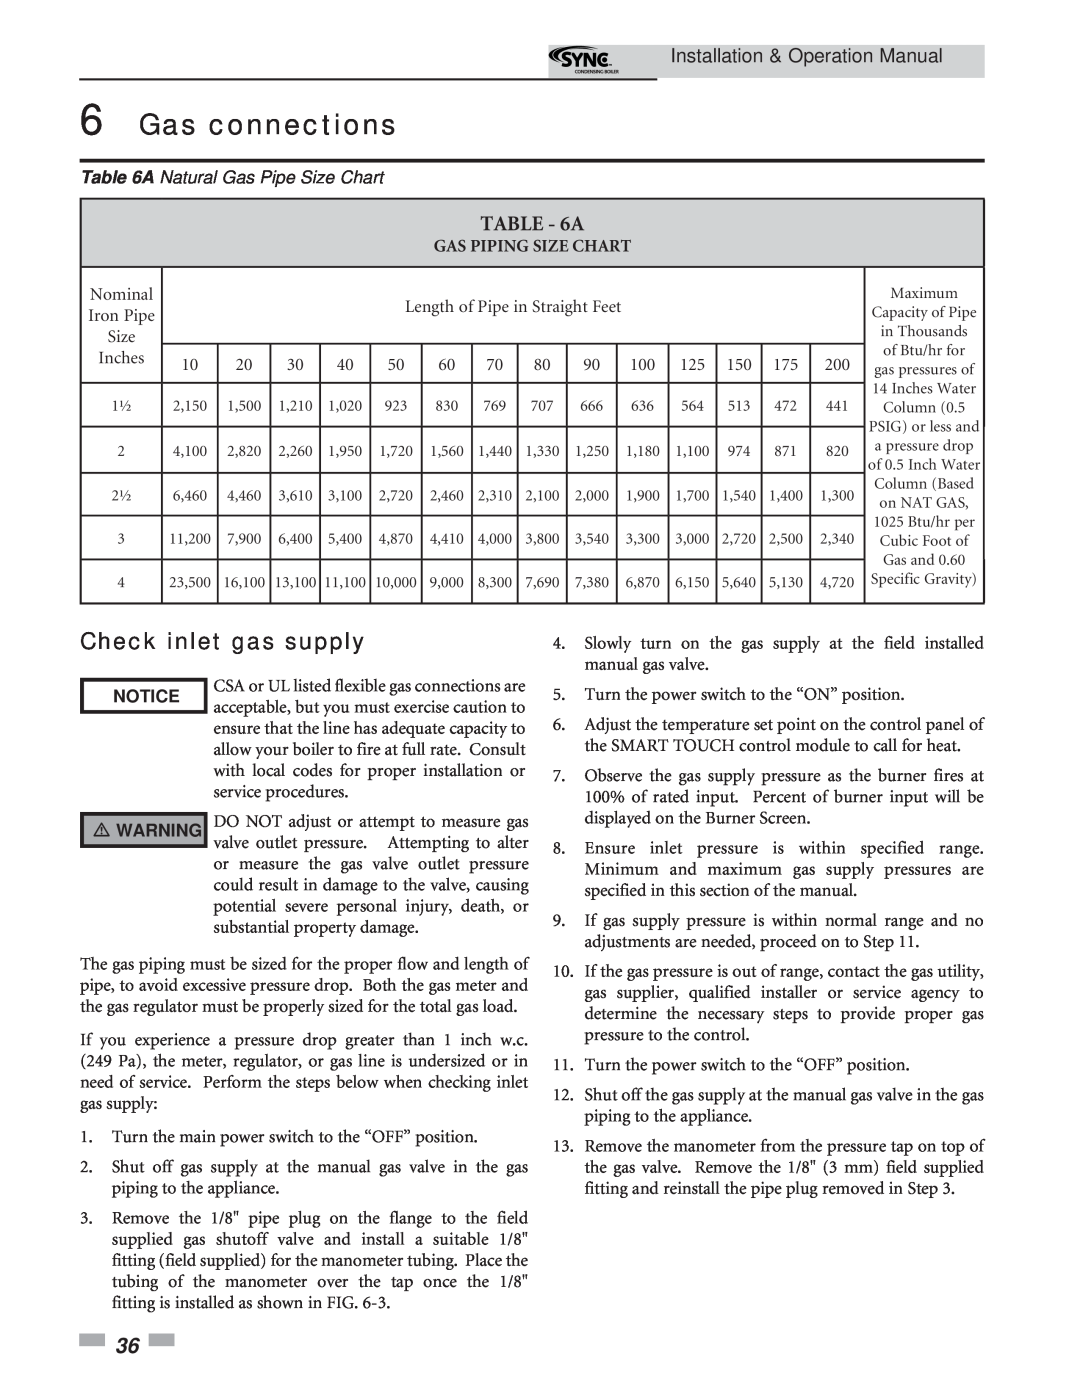 Lochinvar 5 Check inlet gas supply, A Natural Gas Pipe Size Chart, Gas connections, Installation & Operation Manual 